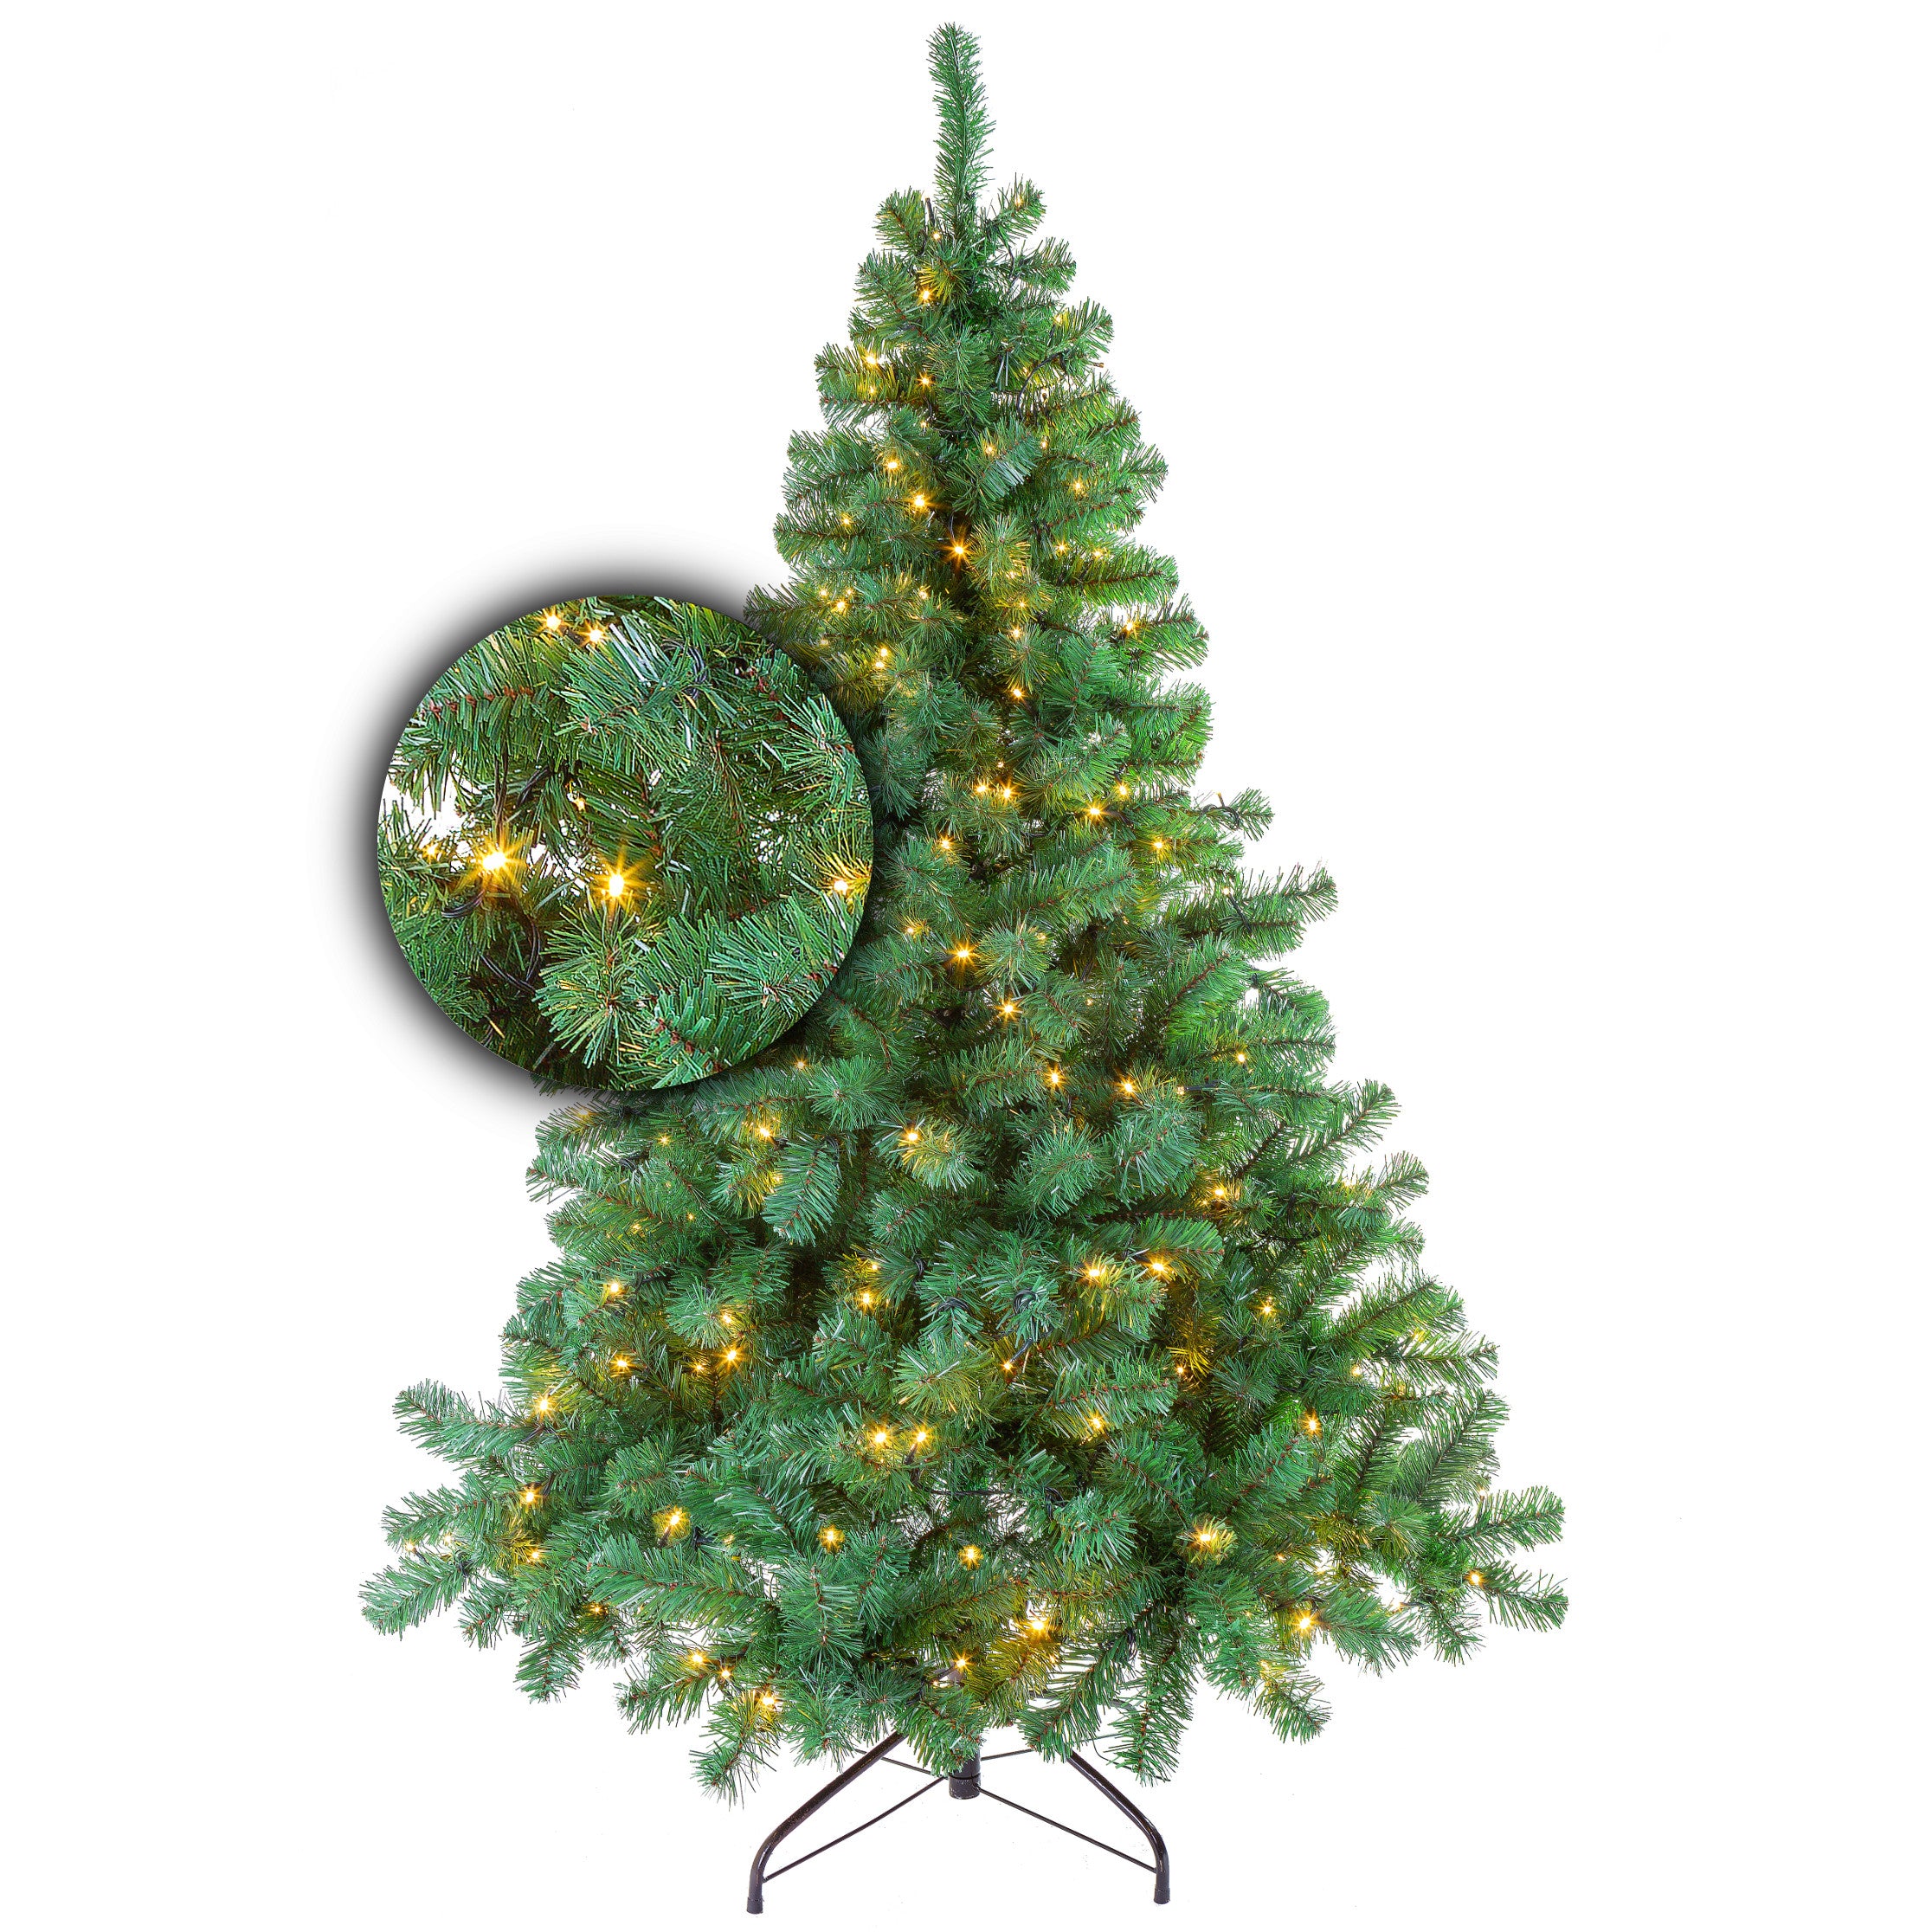 Christmas tree Excellent Trees® LED Stavanger Green 150 cm with lighting - Luxury version